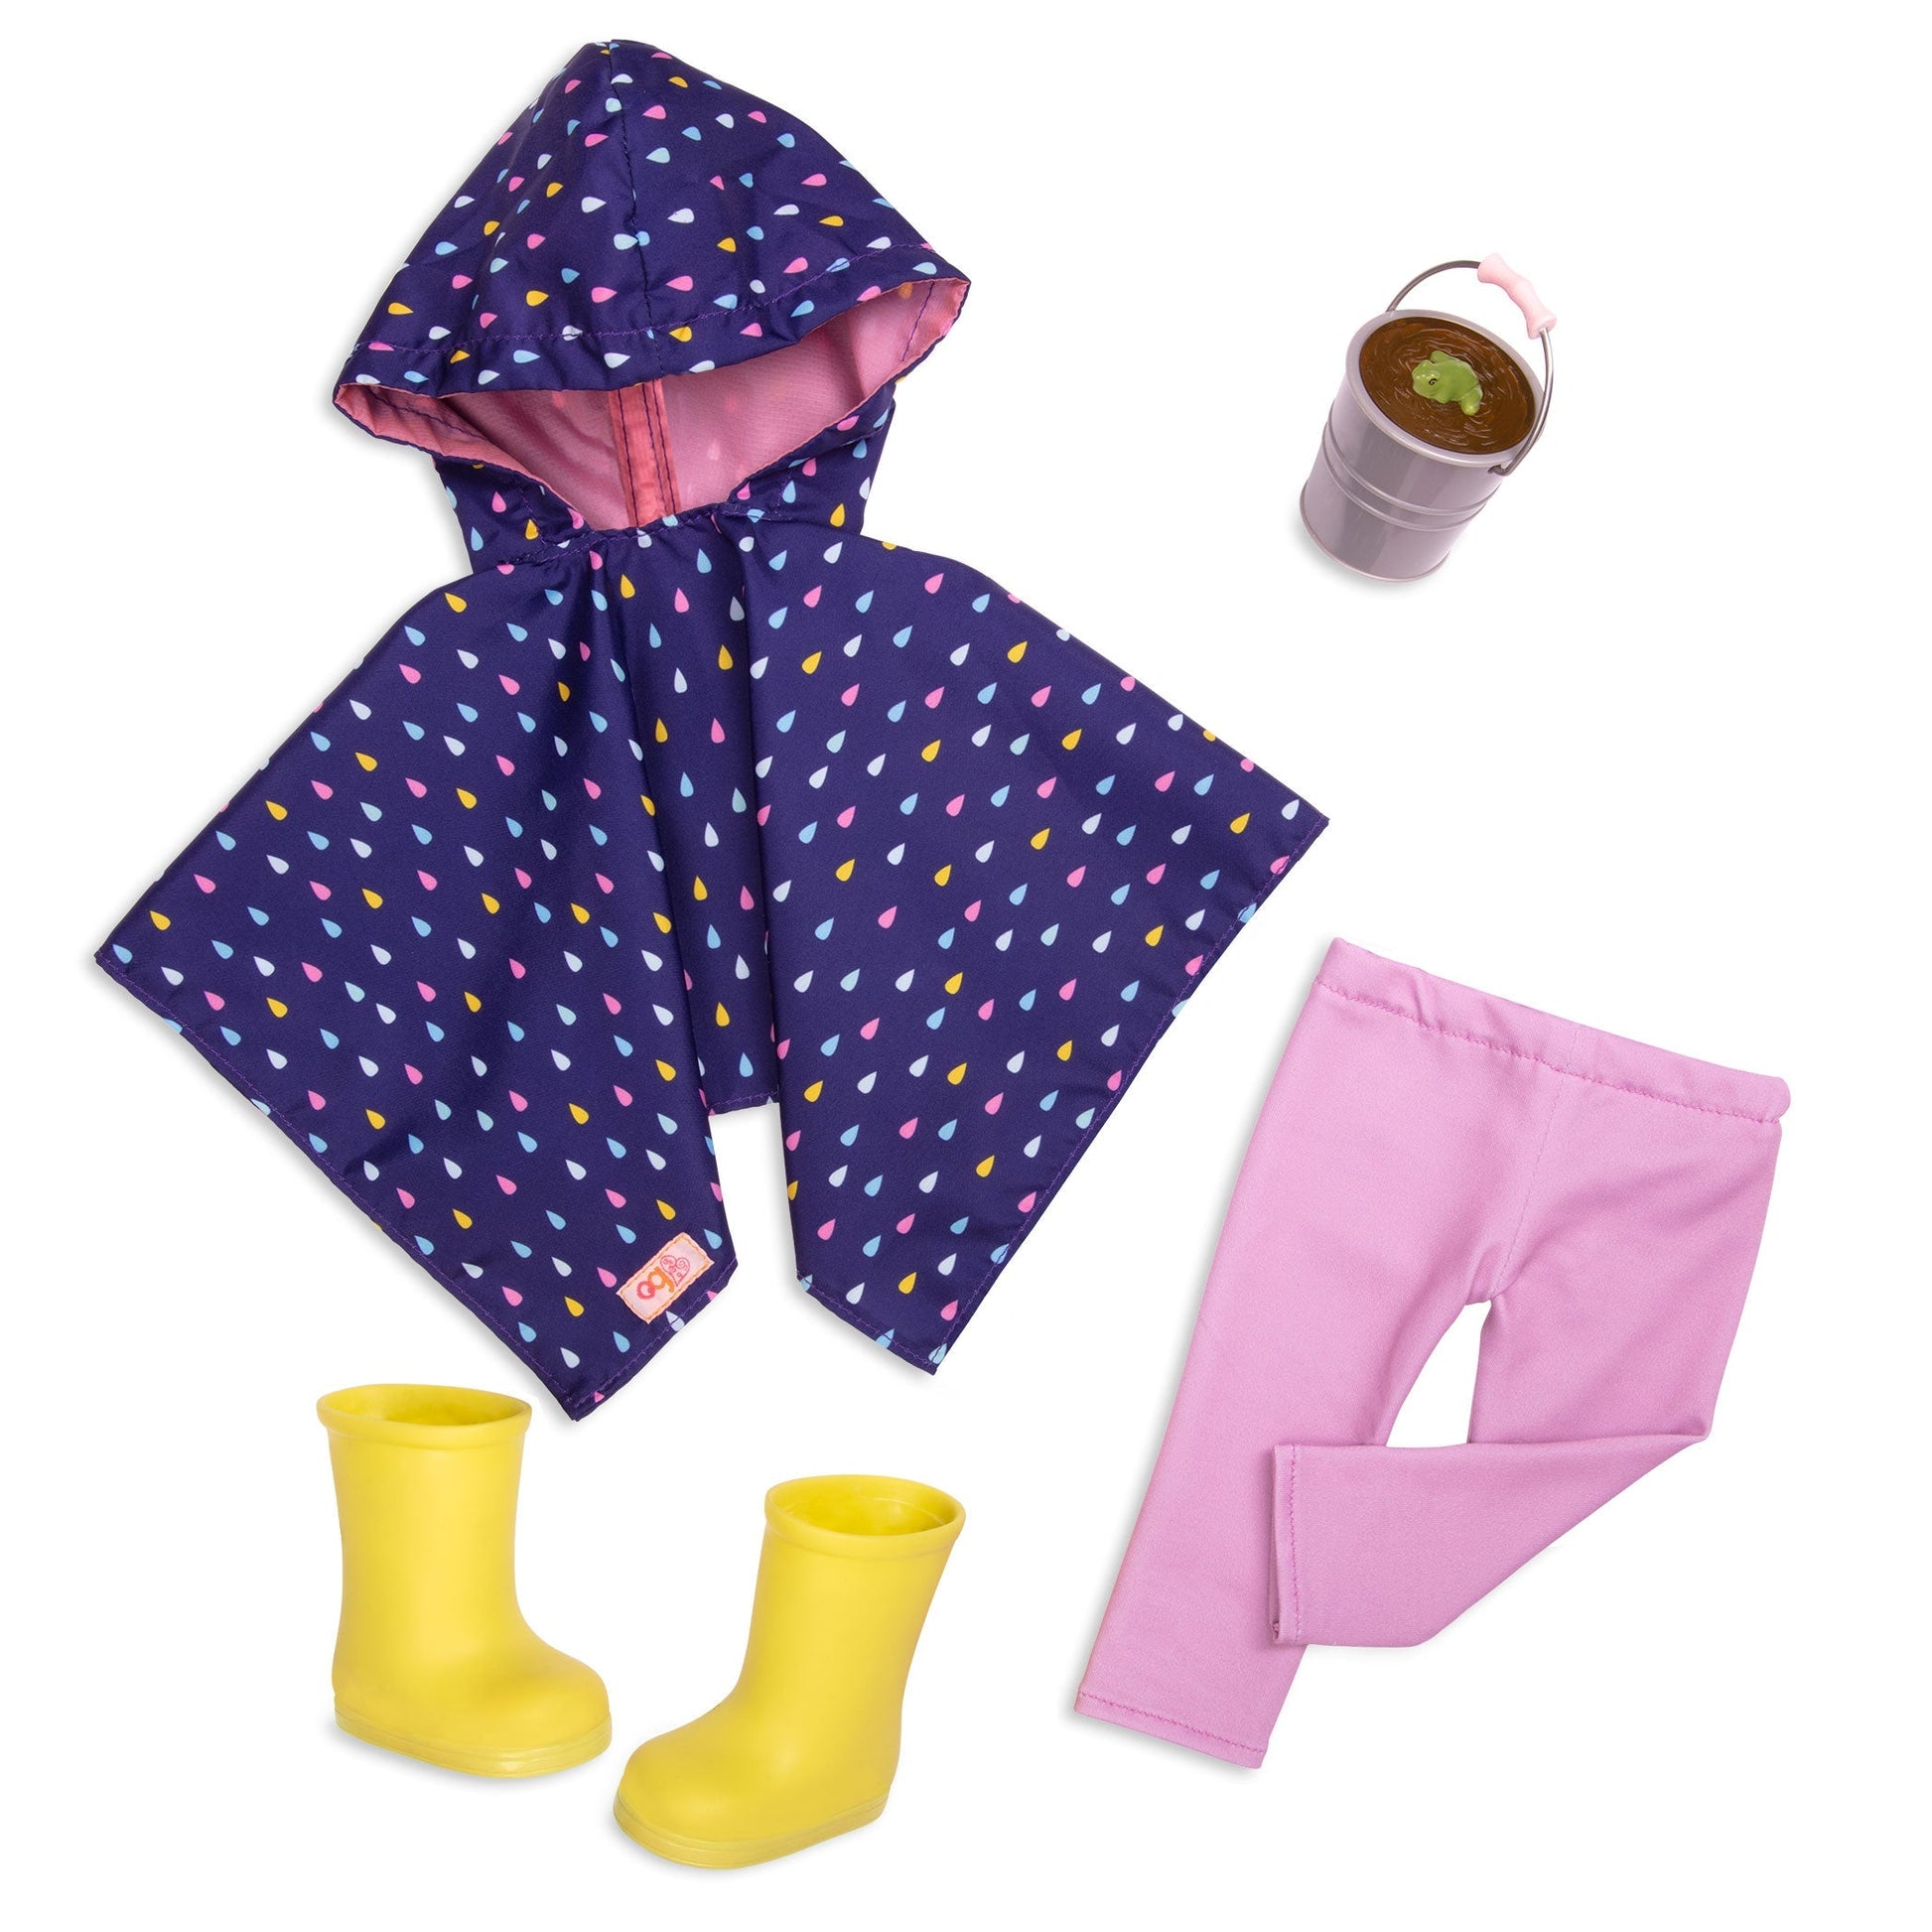 Our Generation Regular Outfit - Raincoat & Boots The Toy Wagon